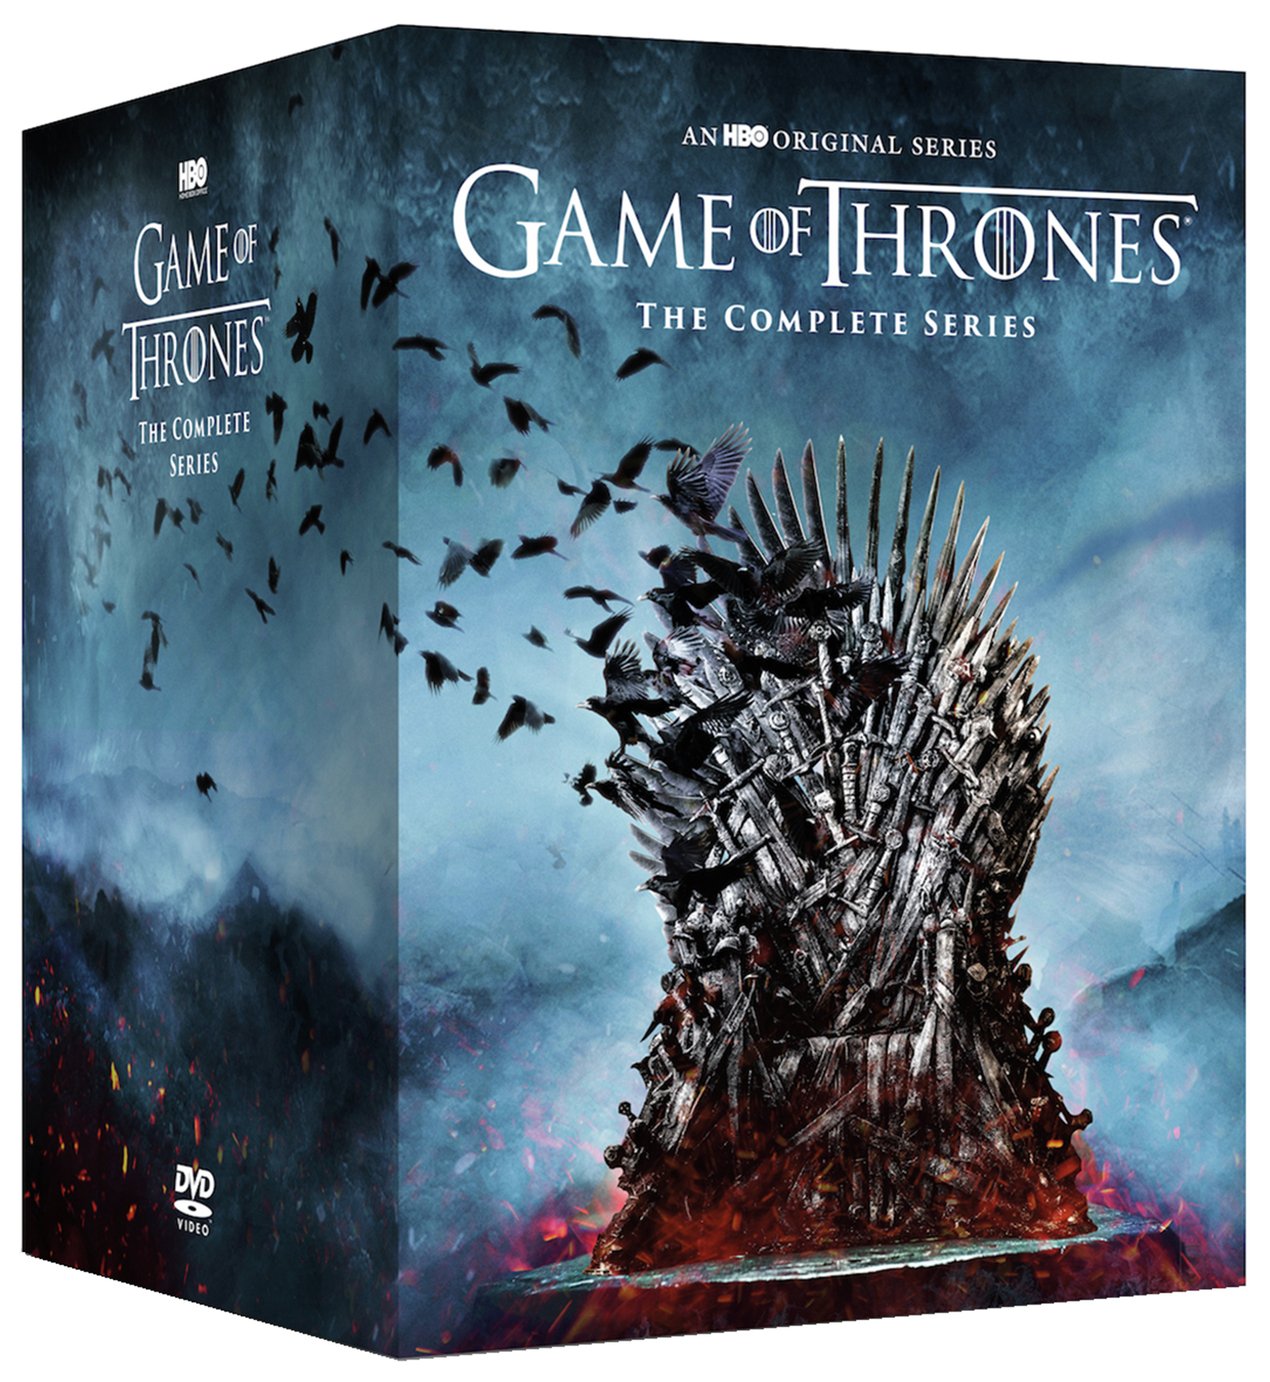 Game of Thrones: The Complete DVD Box Set